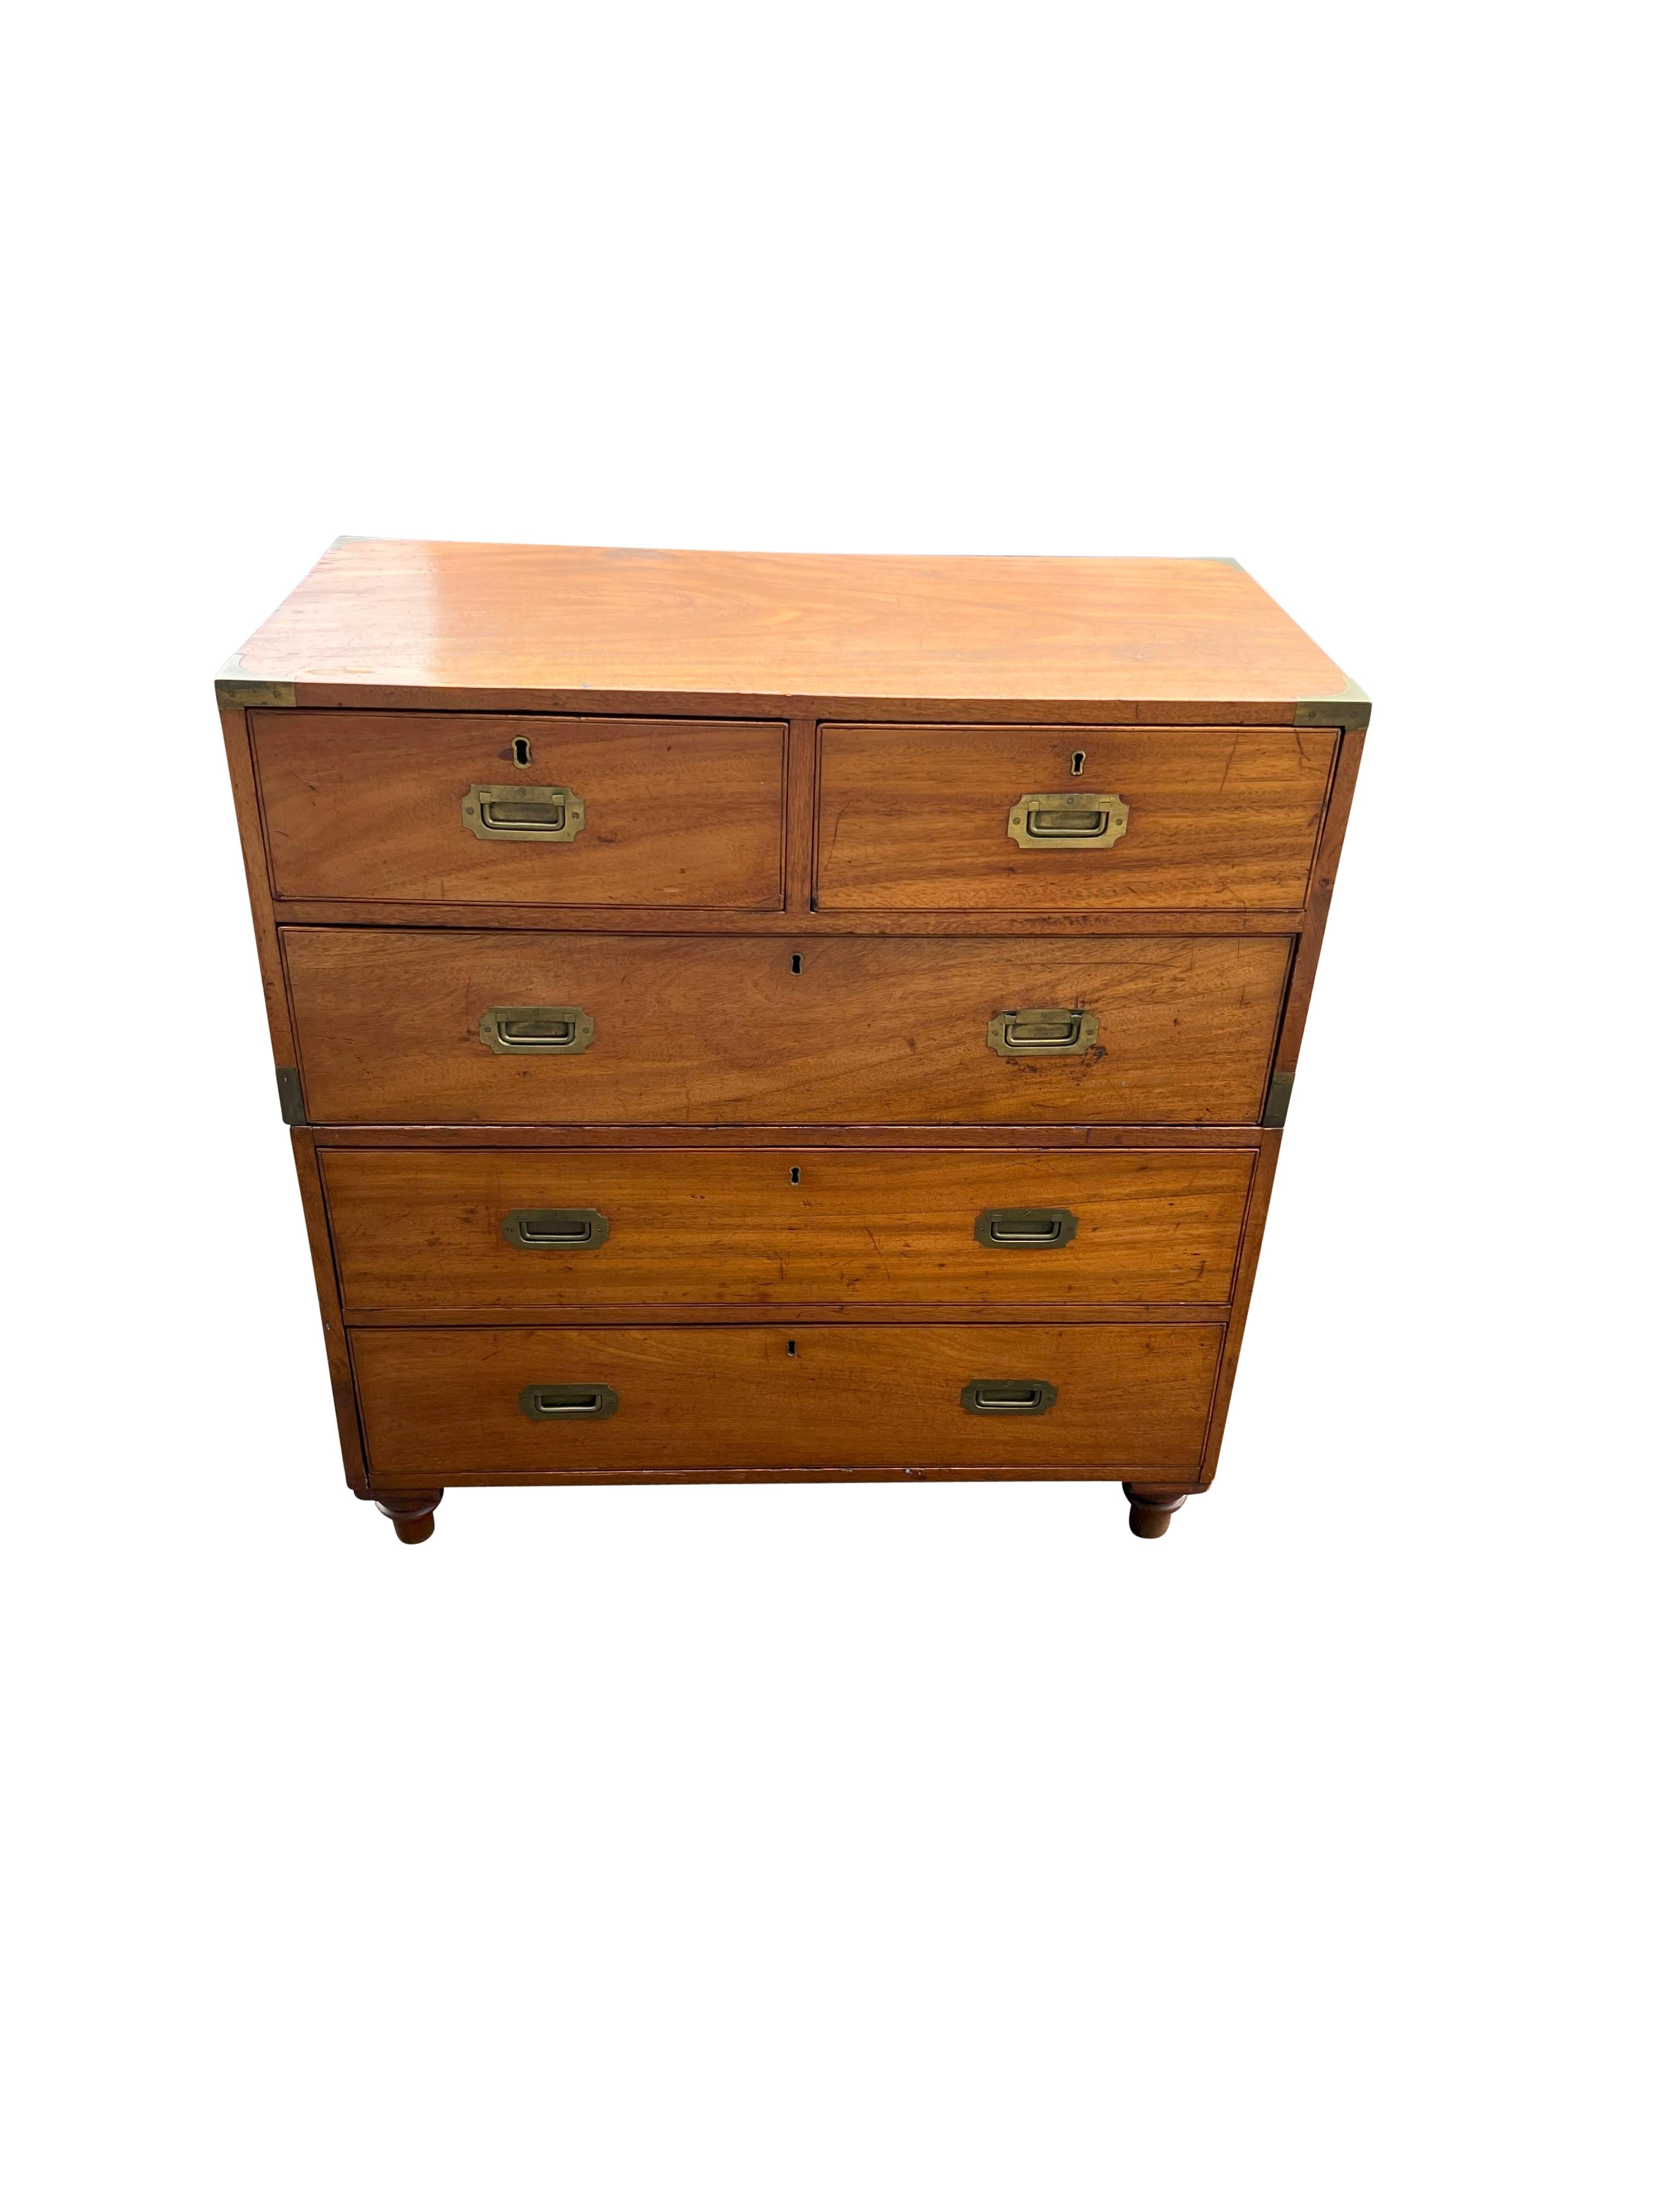 Typical form in two sections. The top with brass corners and two over one long drawer. The lower case with two drawers. Toupie feet. Recessed flush brass handles.